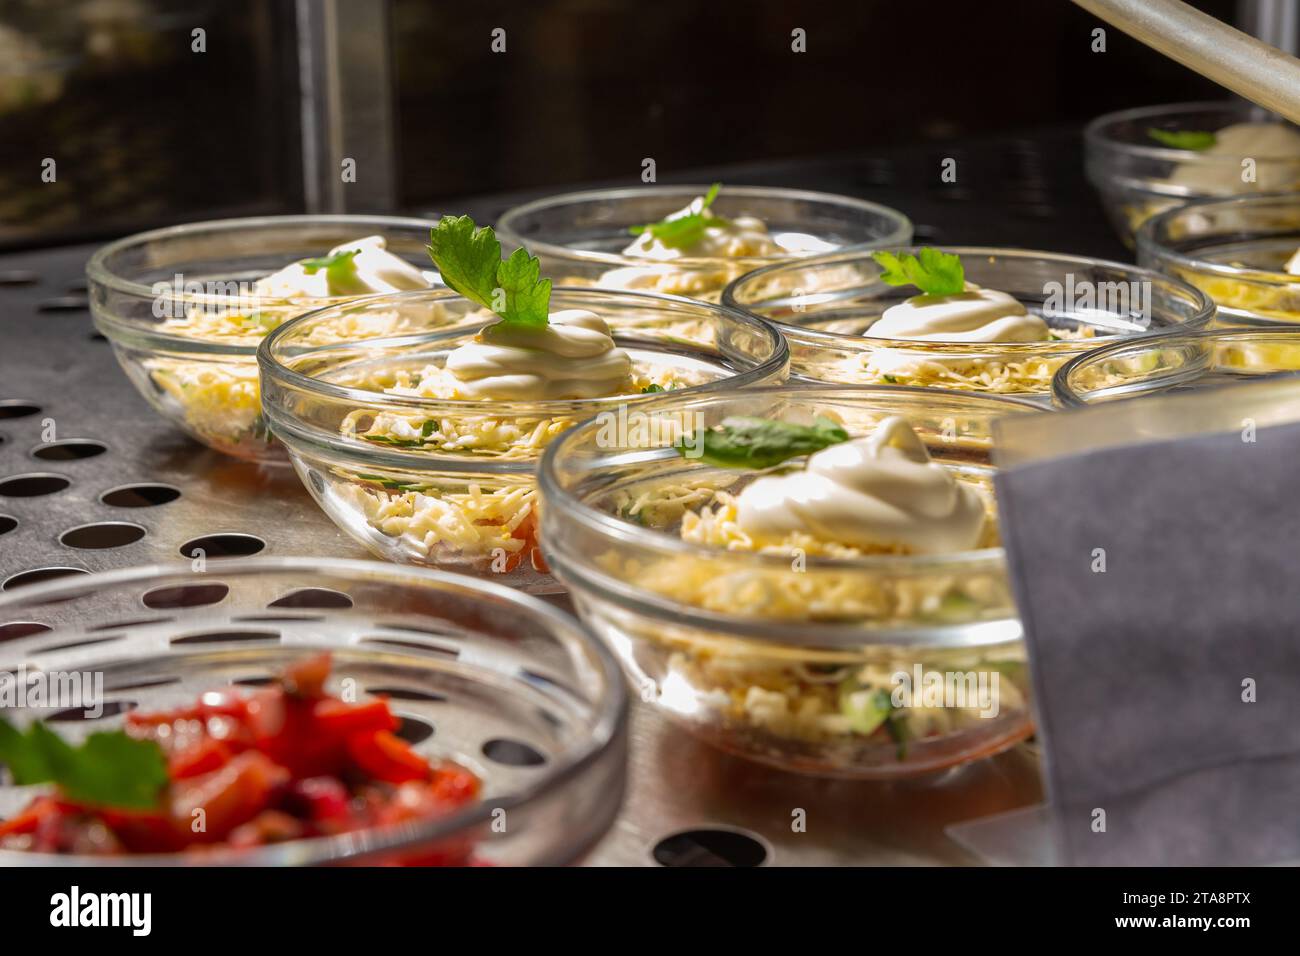 Plates with various pastries in the cafeteria window. Cooling showcase for salads in the dining room or cafeteria Stock Photo